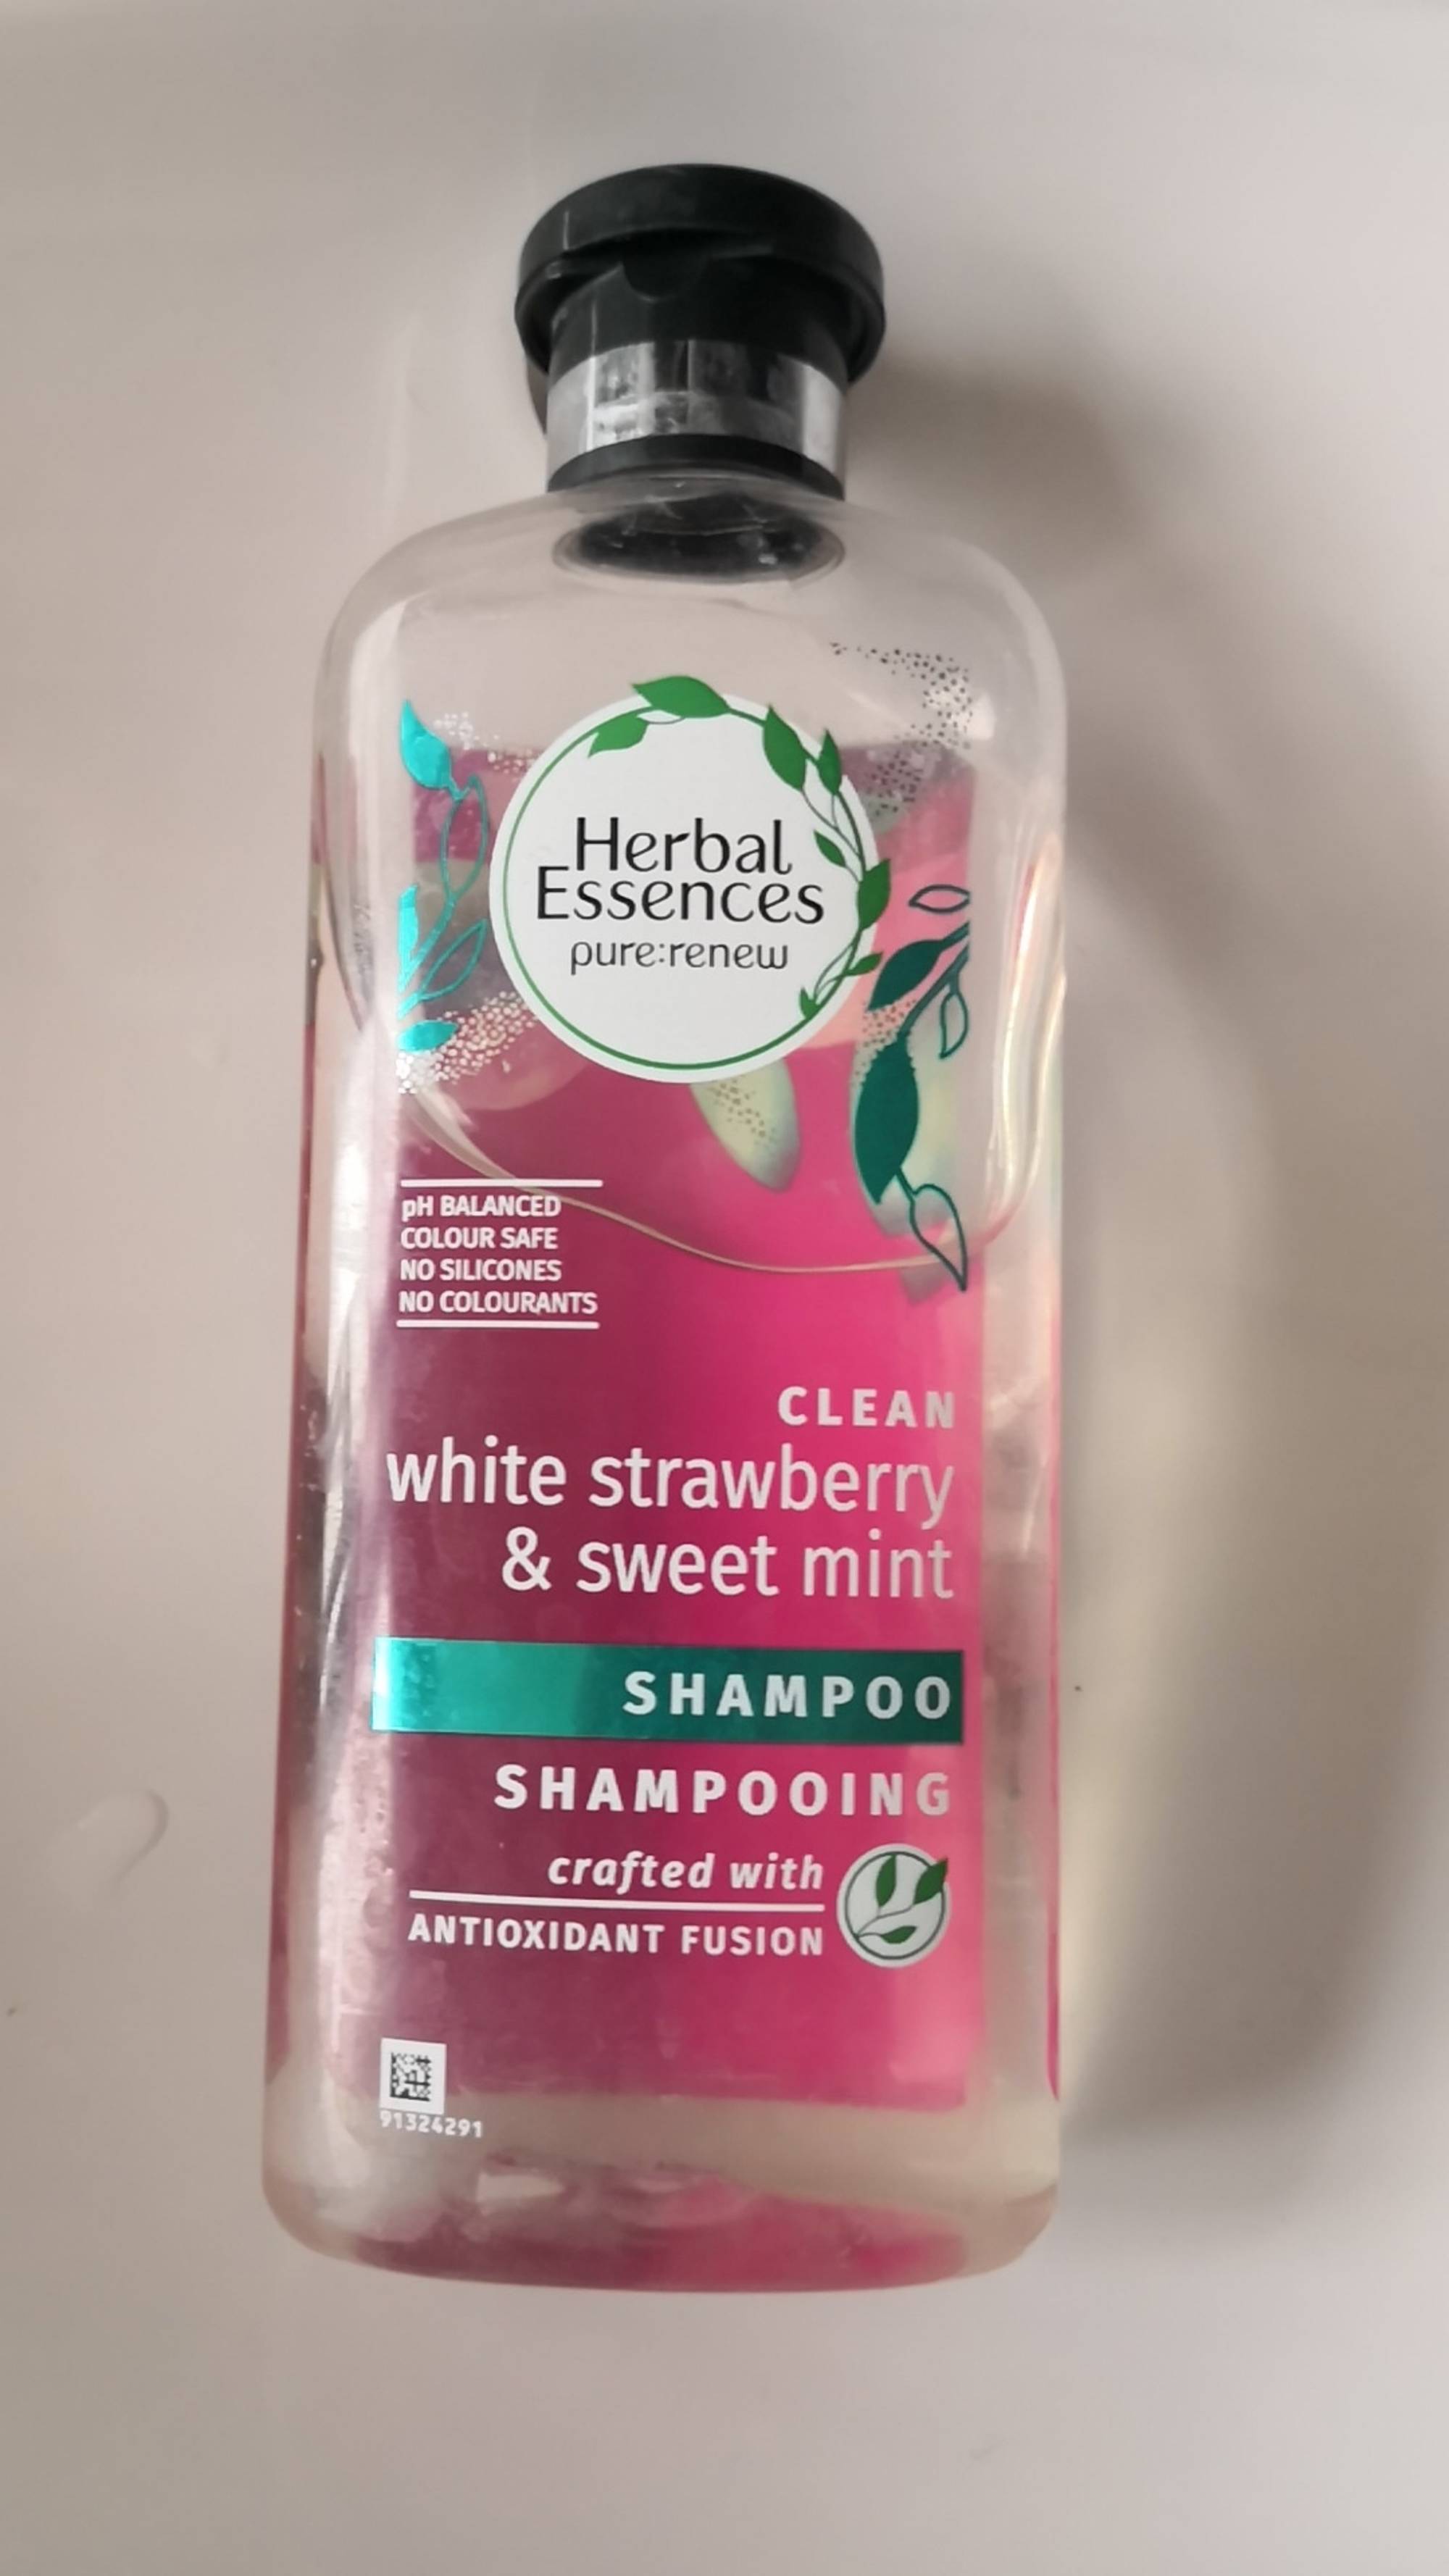 HERBAL ESSENCES -  Shampooing white strawberry & sweet mint